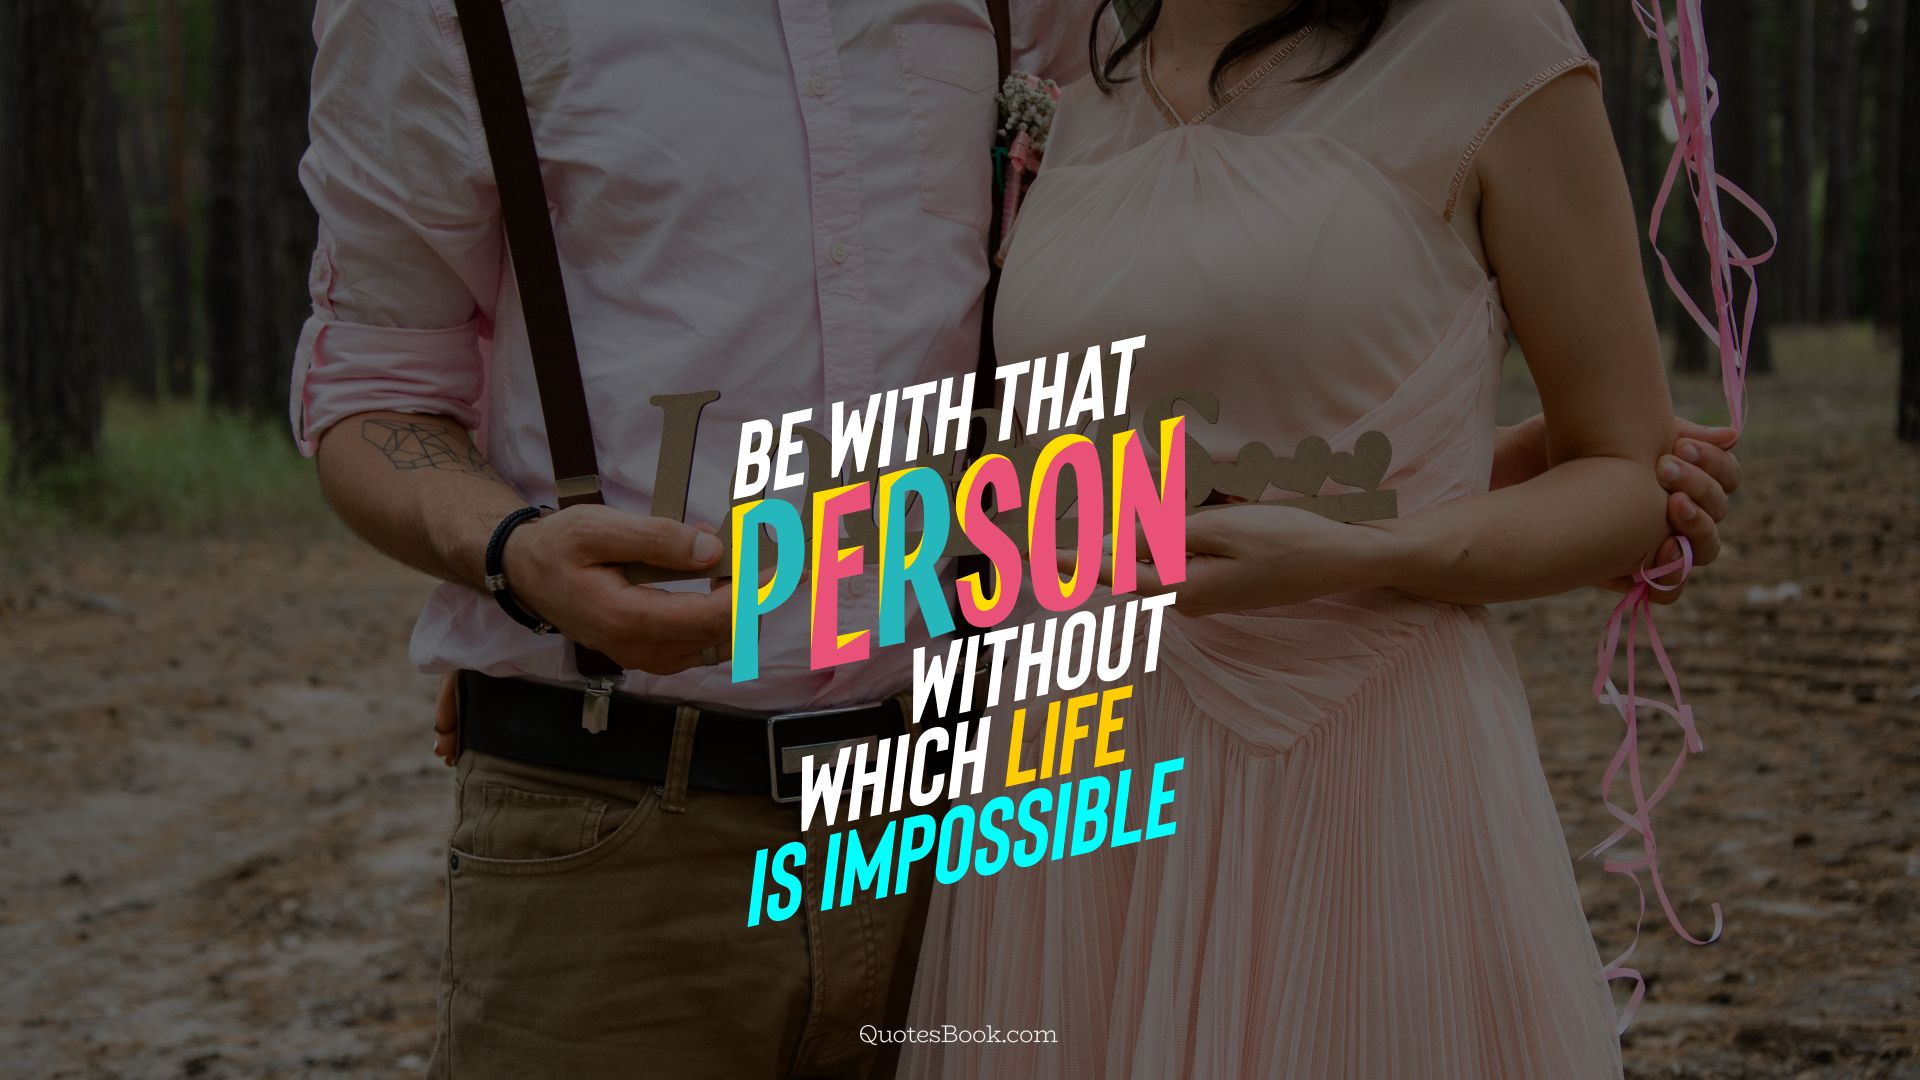 Be with that person, without which life is impossible. - Quote by QuotesBook